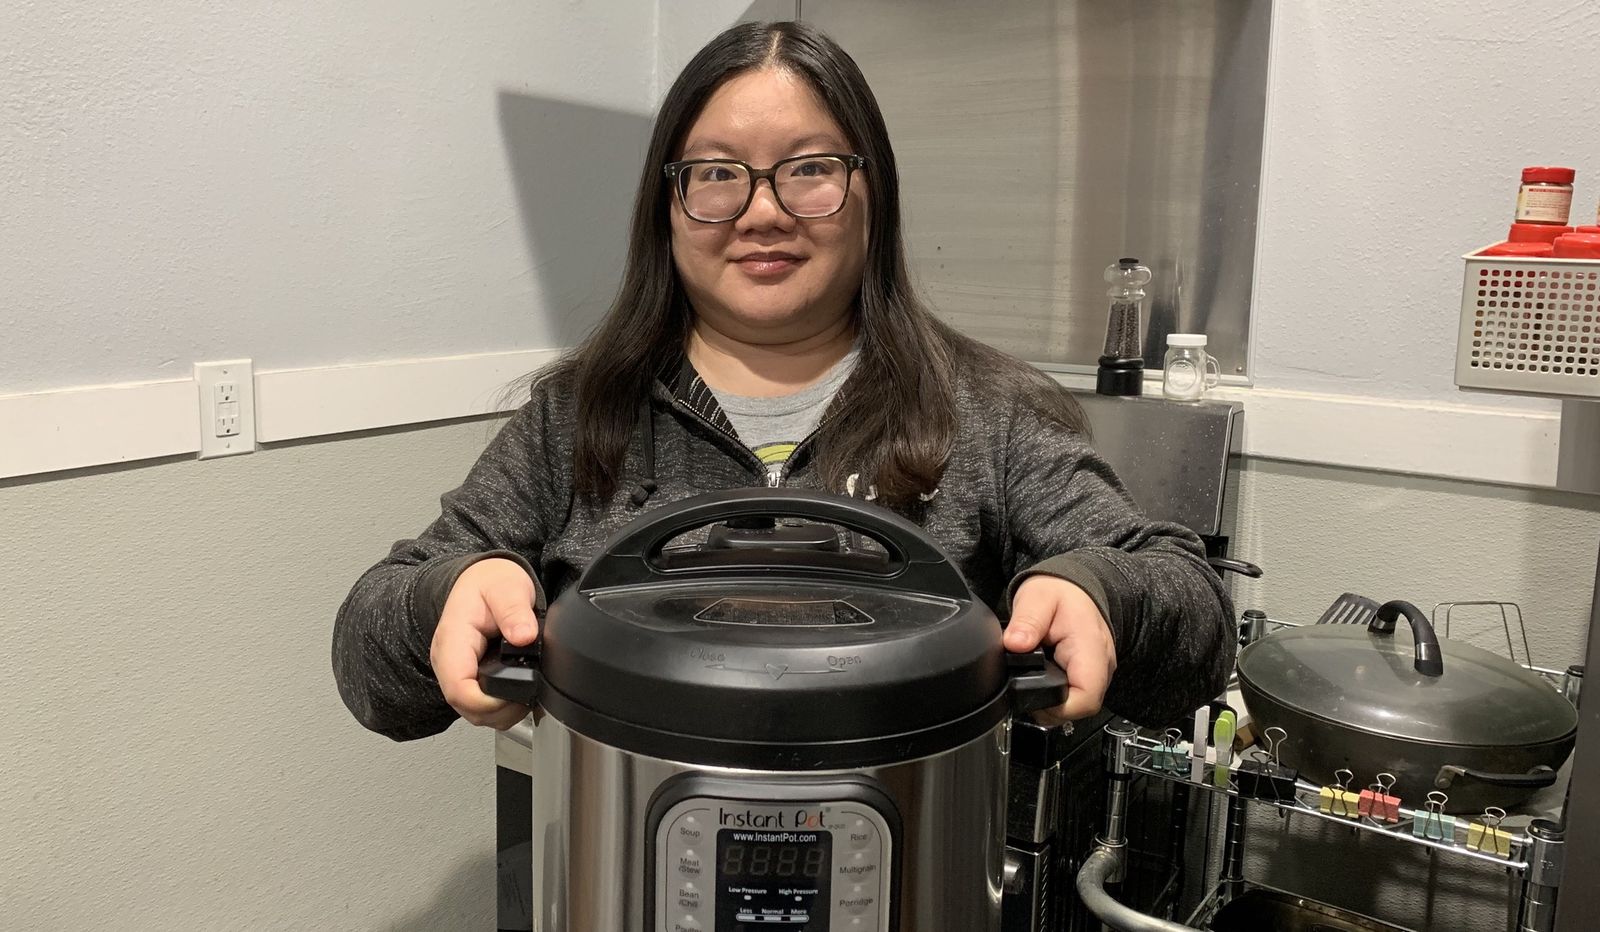 Christine Chan gladly holds up her Instant Pot, which is one of her favorite kitchen appliances